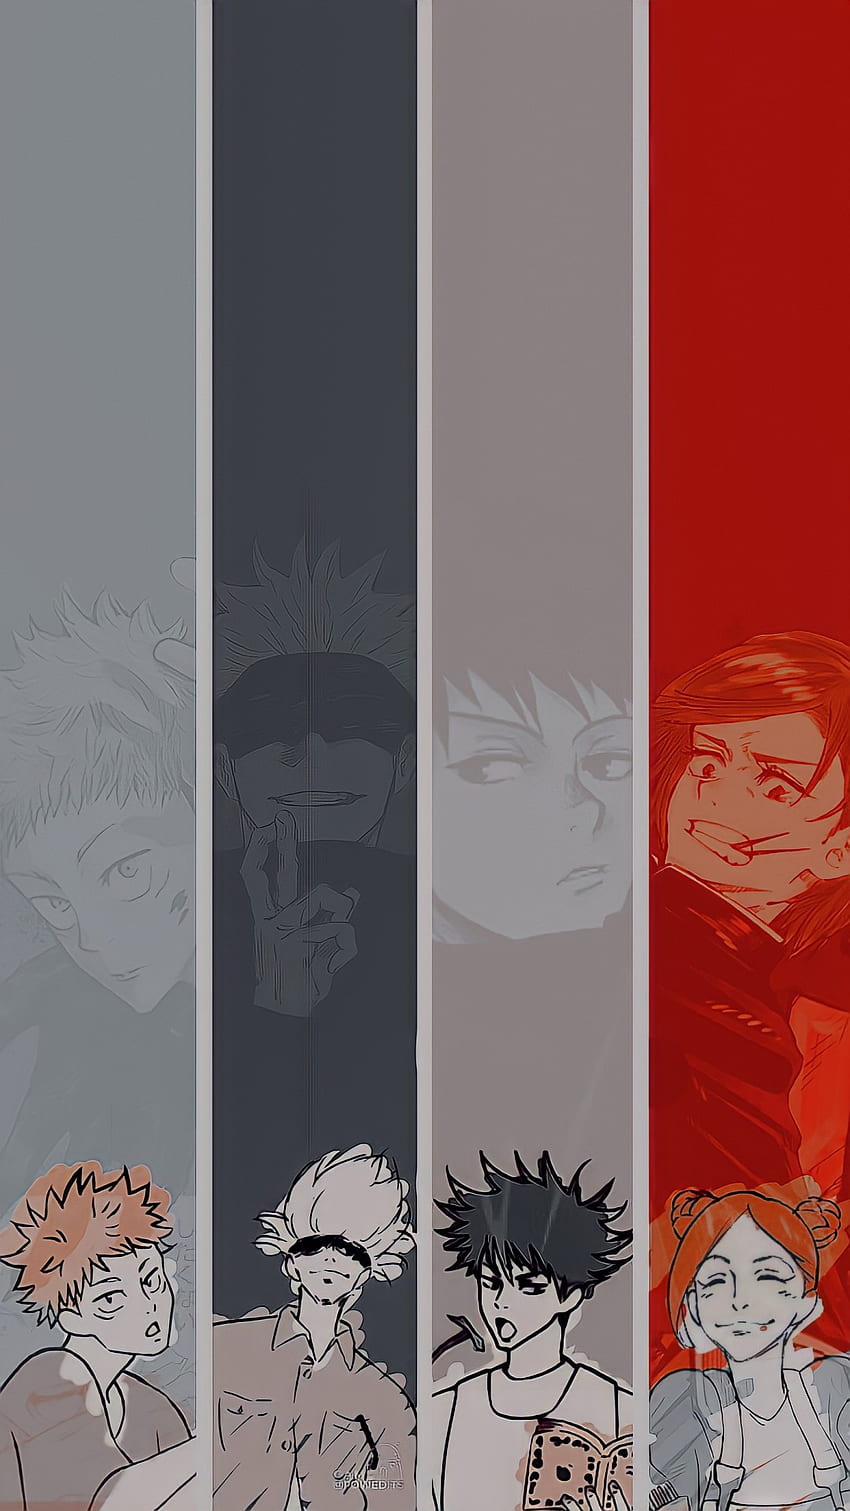 megummy  jjk  lia on Twitter jujutsu kaisen wallpapers  made by  gojovibe please do not repost them and you can suggest some other anime  wallpapers also ill also be making